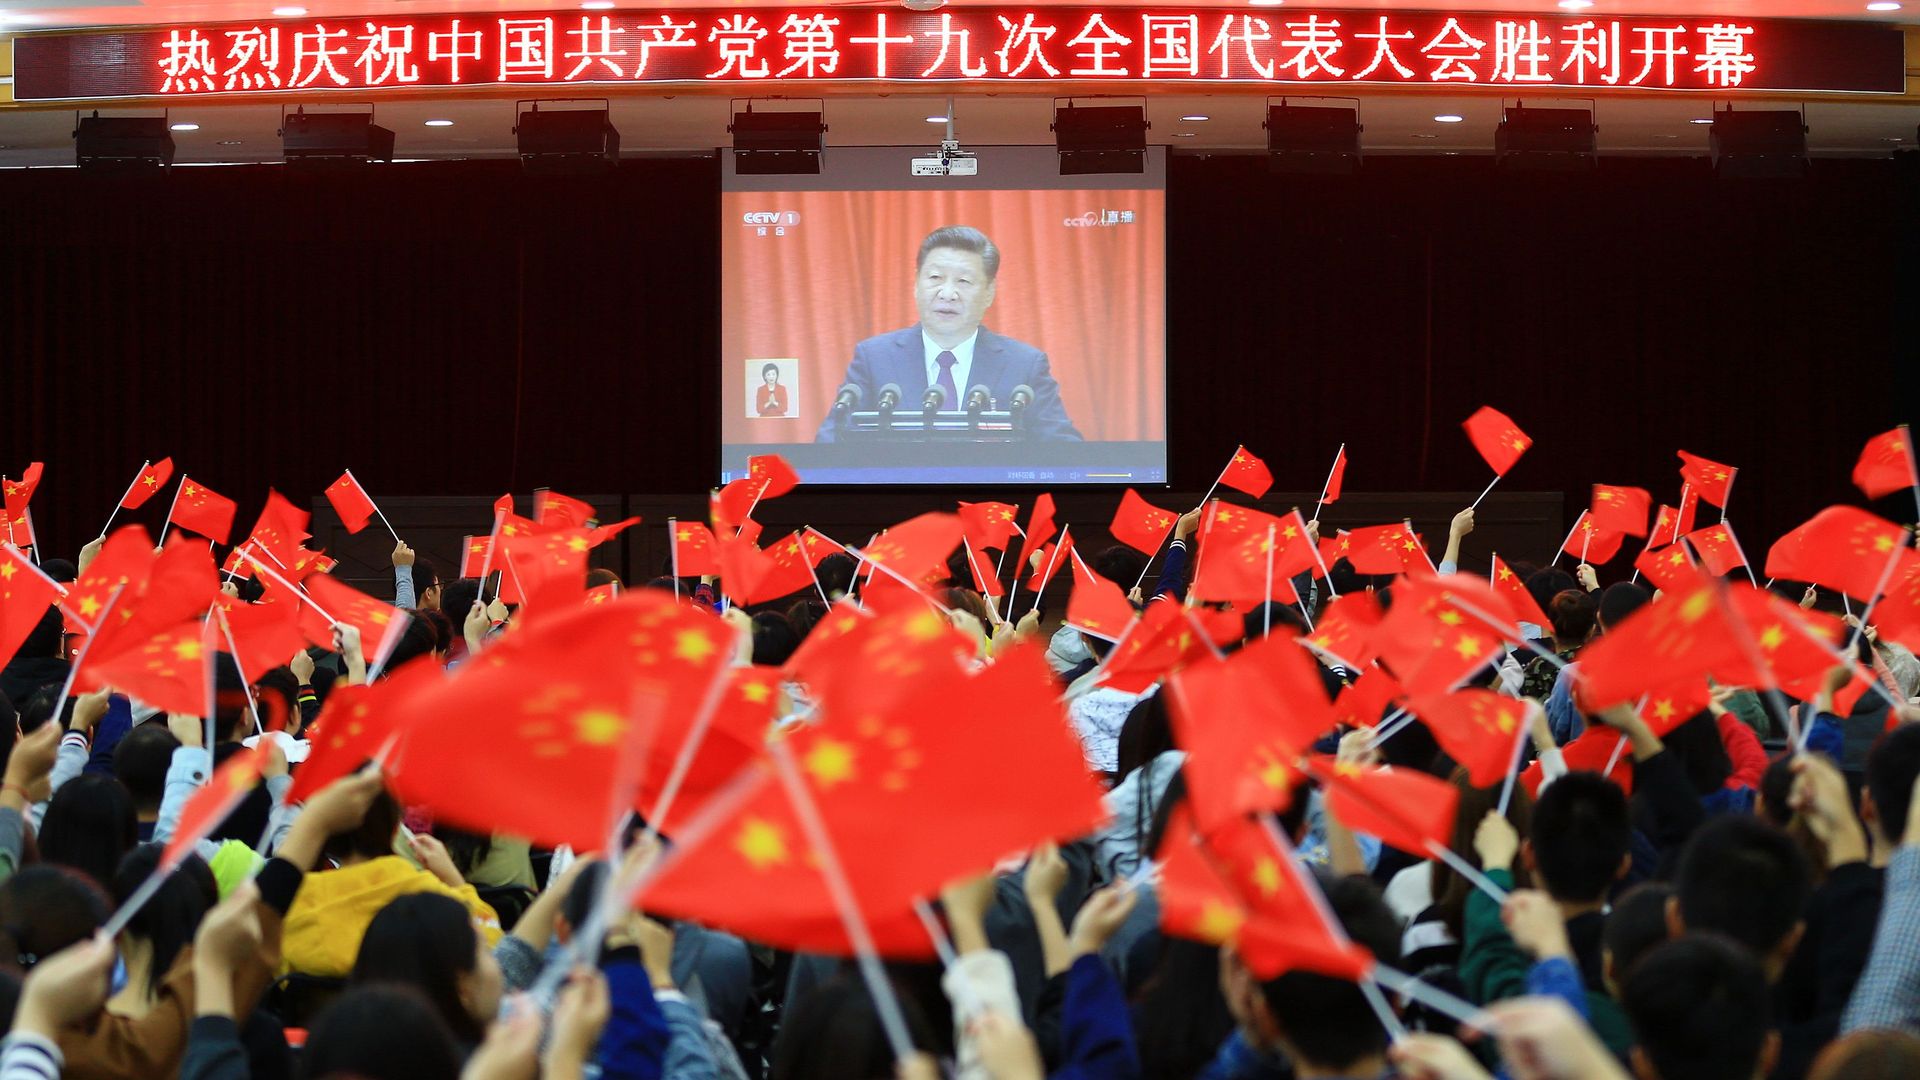 College students waiving Chinese flags in school stadium watching Xi Jinping speak on screen